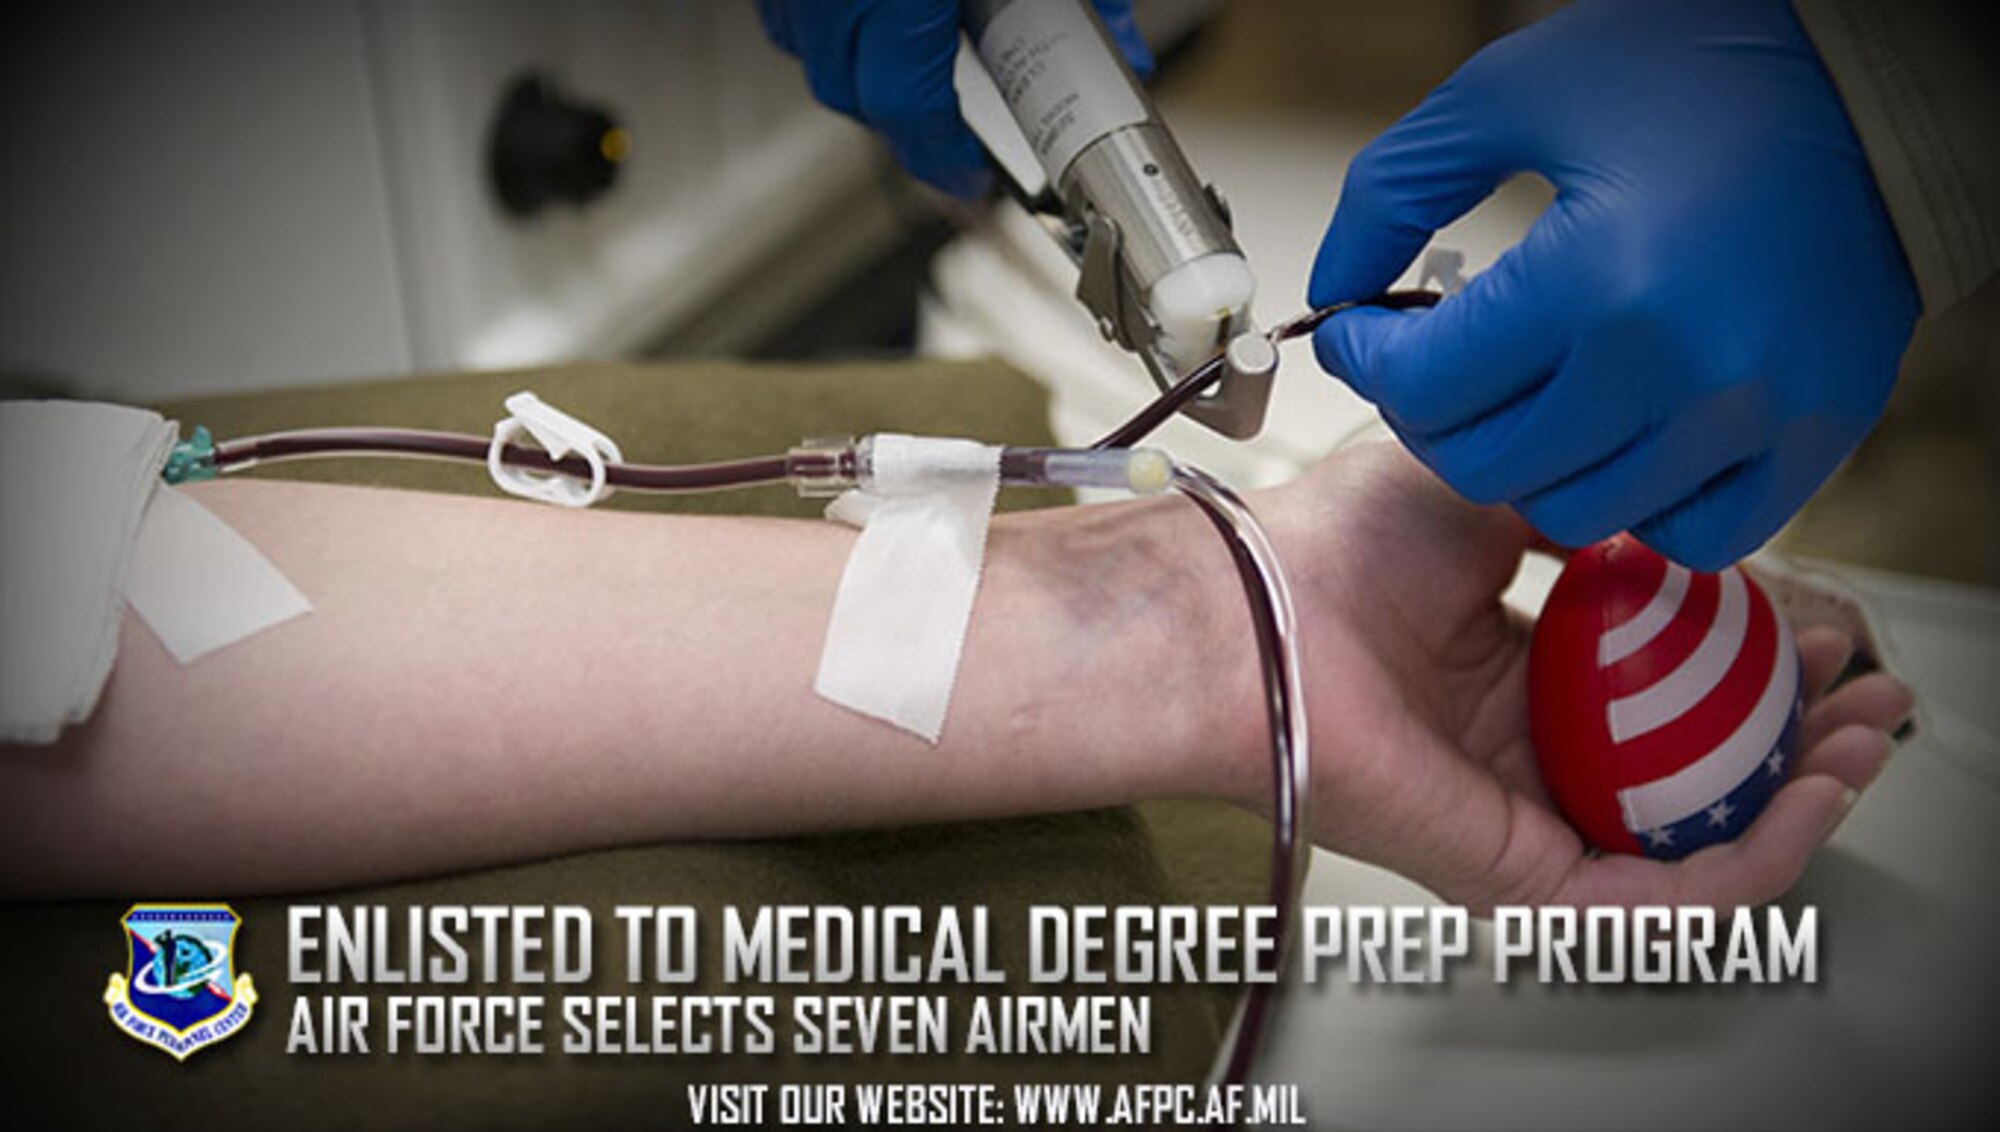 The Air Force has selected seven enlisted Airmen to participate in the Enlisted to Medical Degree Preparatory Program. The EMDP2 offers enlisted members an opportunity to complete the preparatory coursework for admission to medical school while maintaining active duty status and full pay and benefits. (U.S. Air Force photo by Tech. Sgt. Robert Cloys)